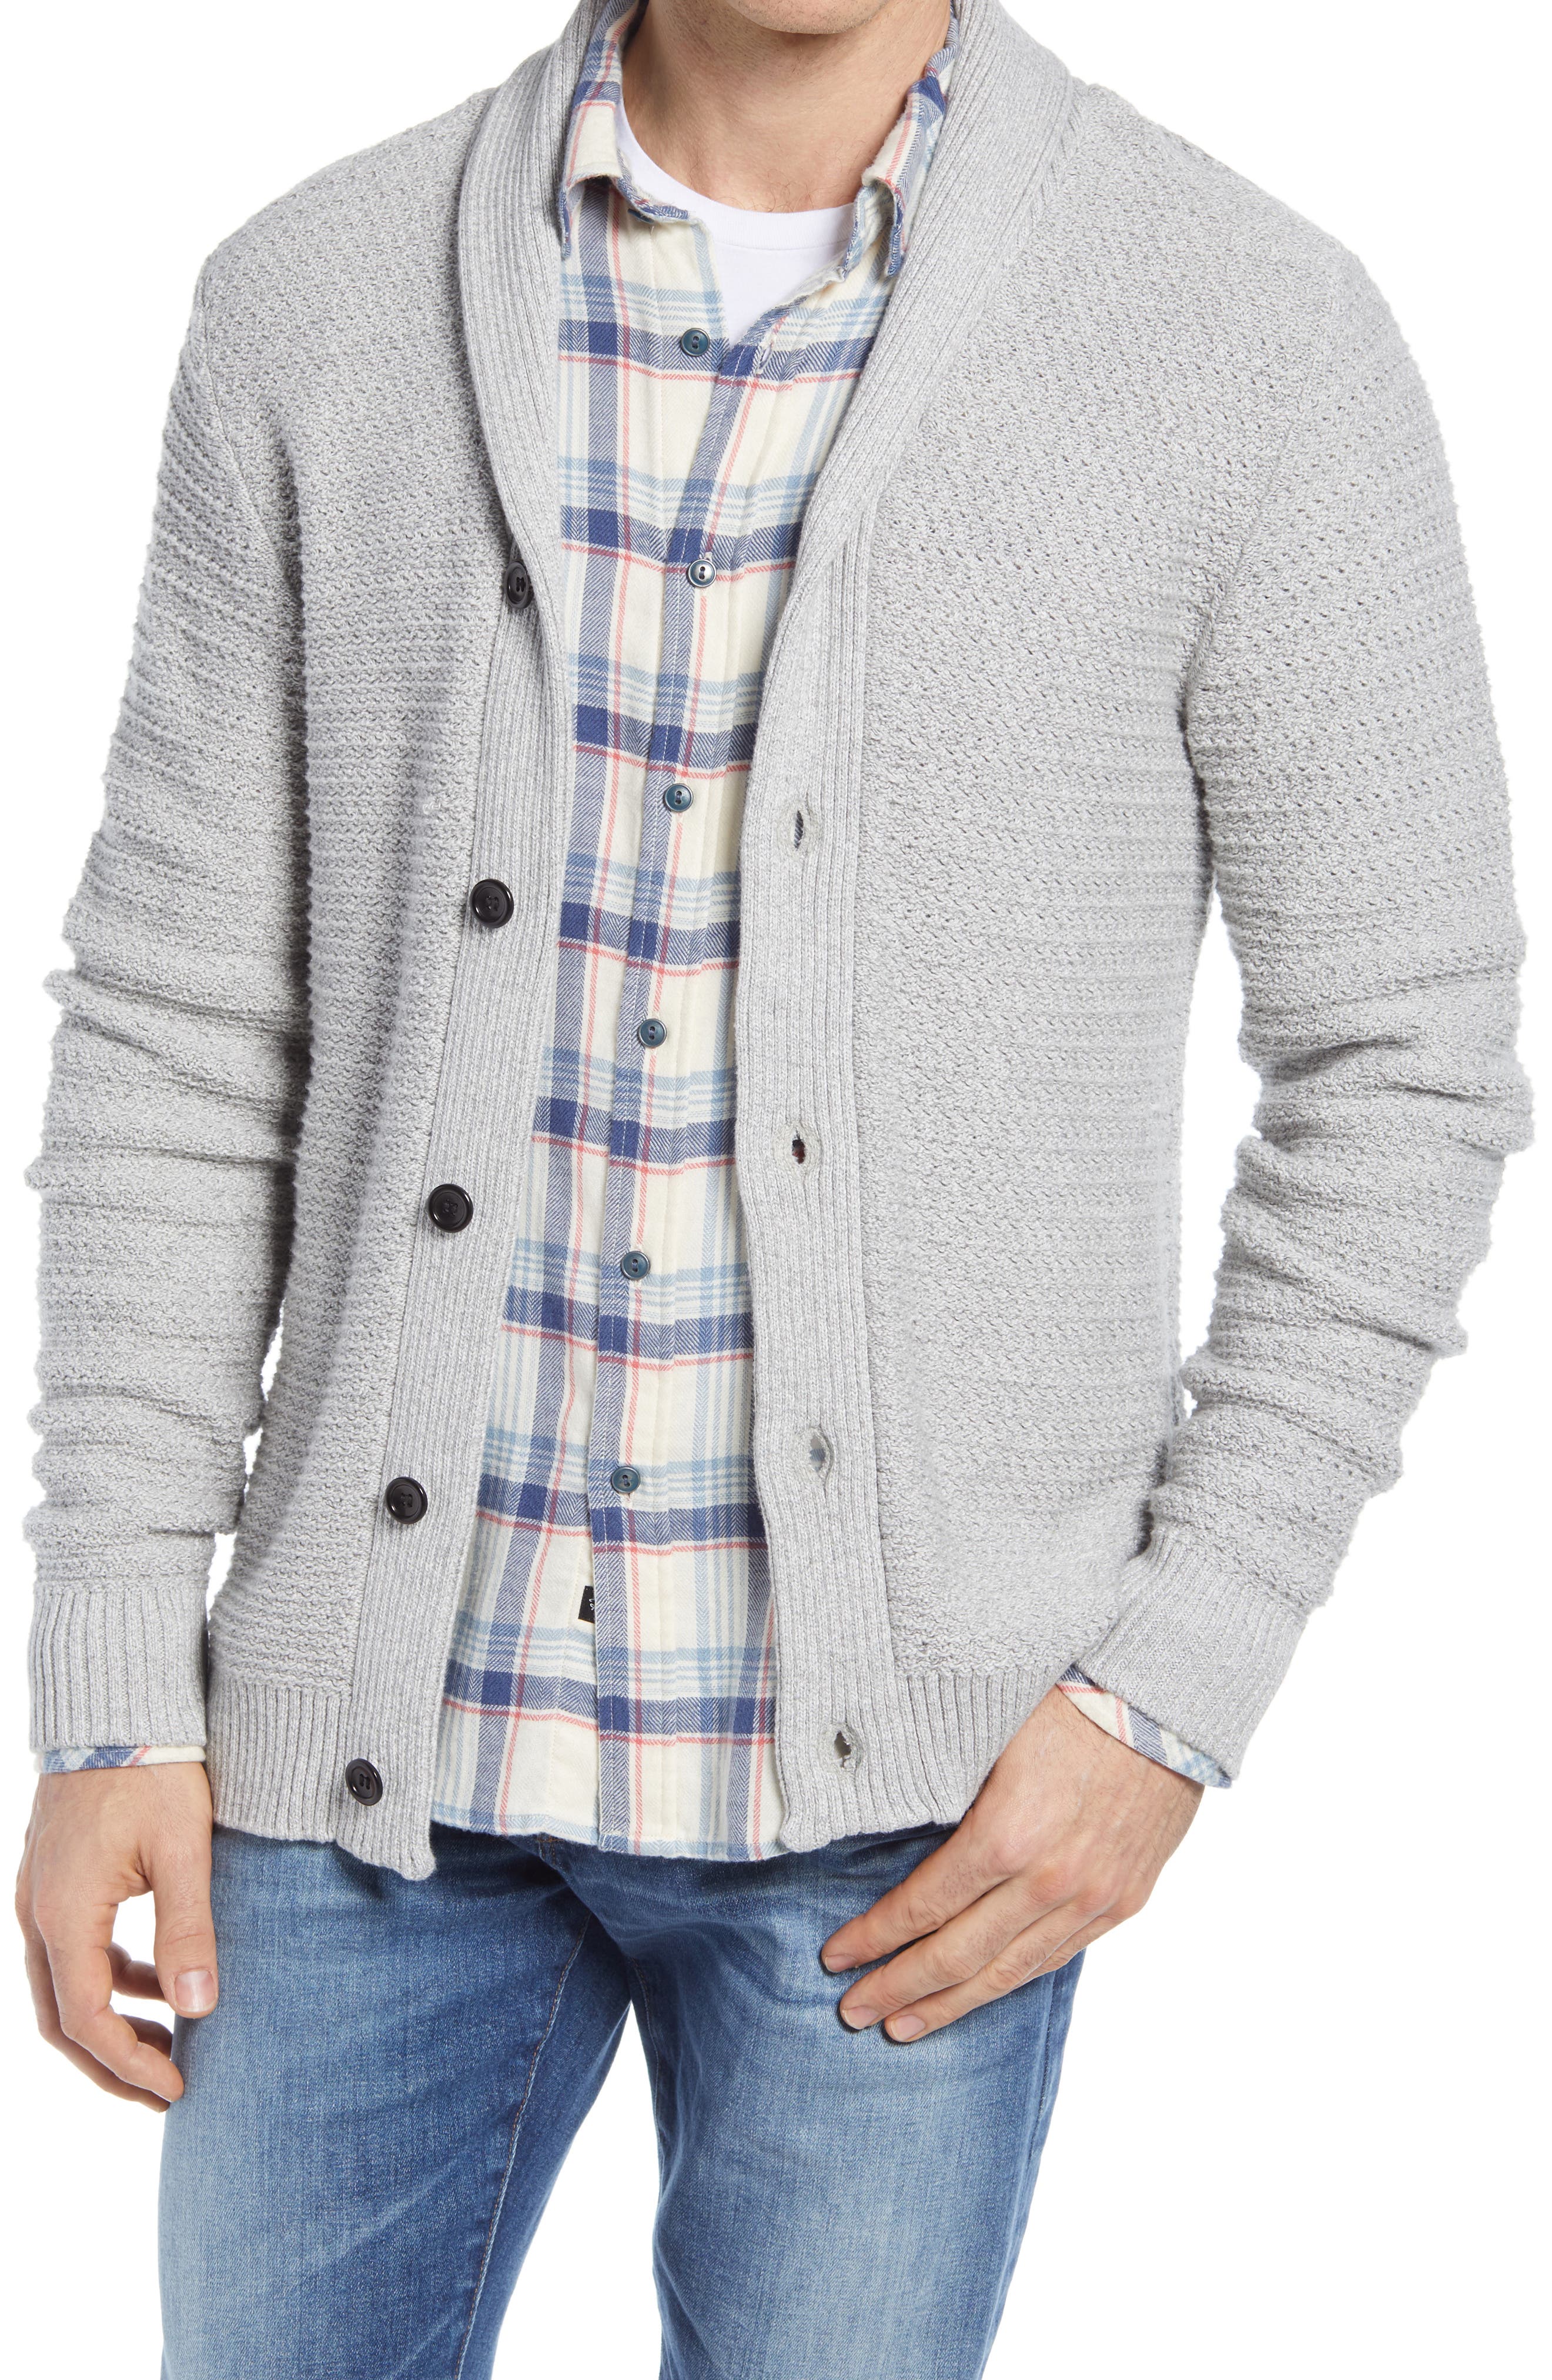 s.Oliver Mens Cardigan Sweater Q//S designed by